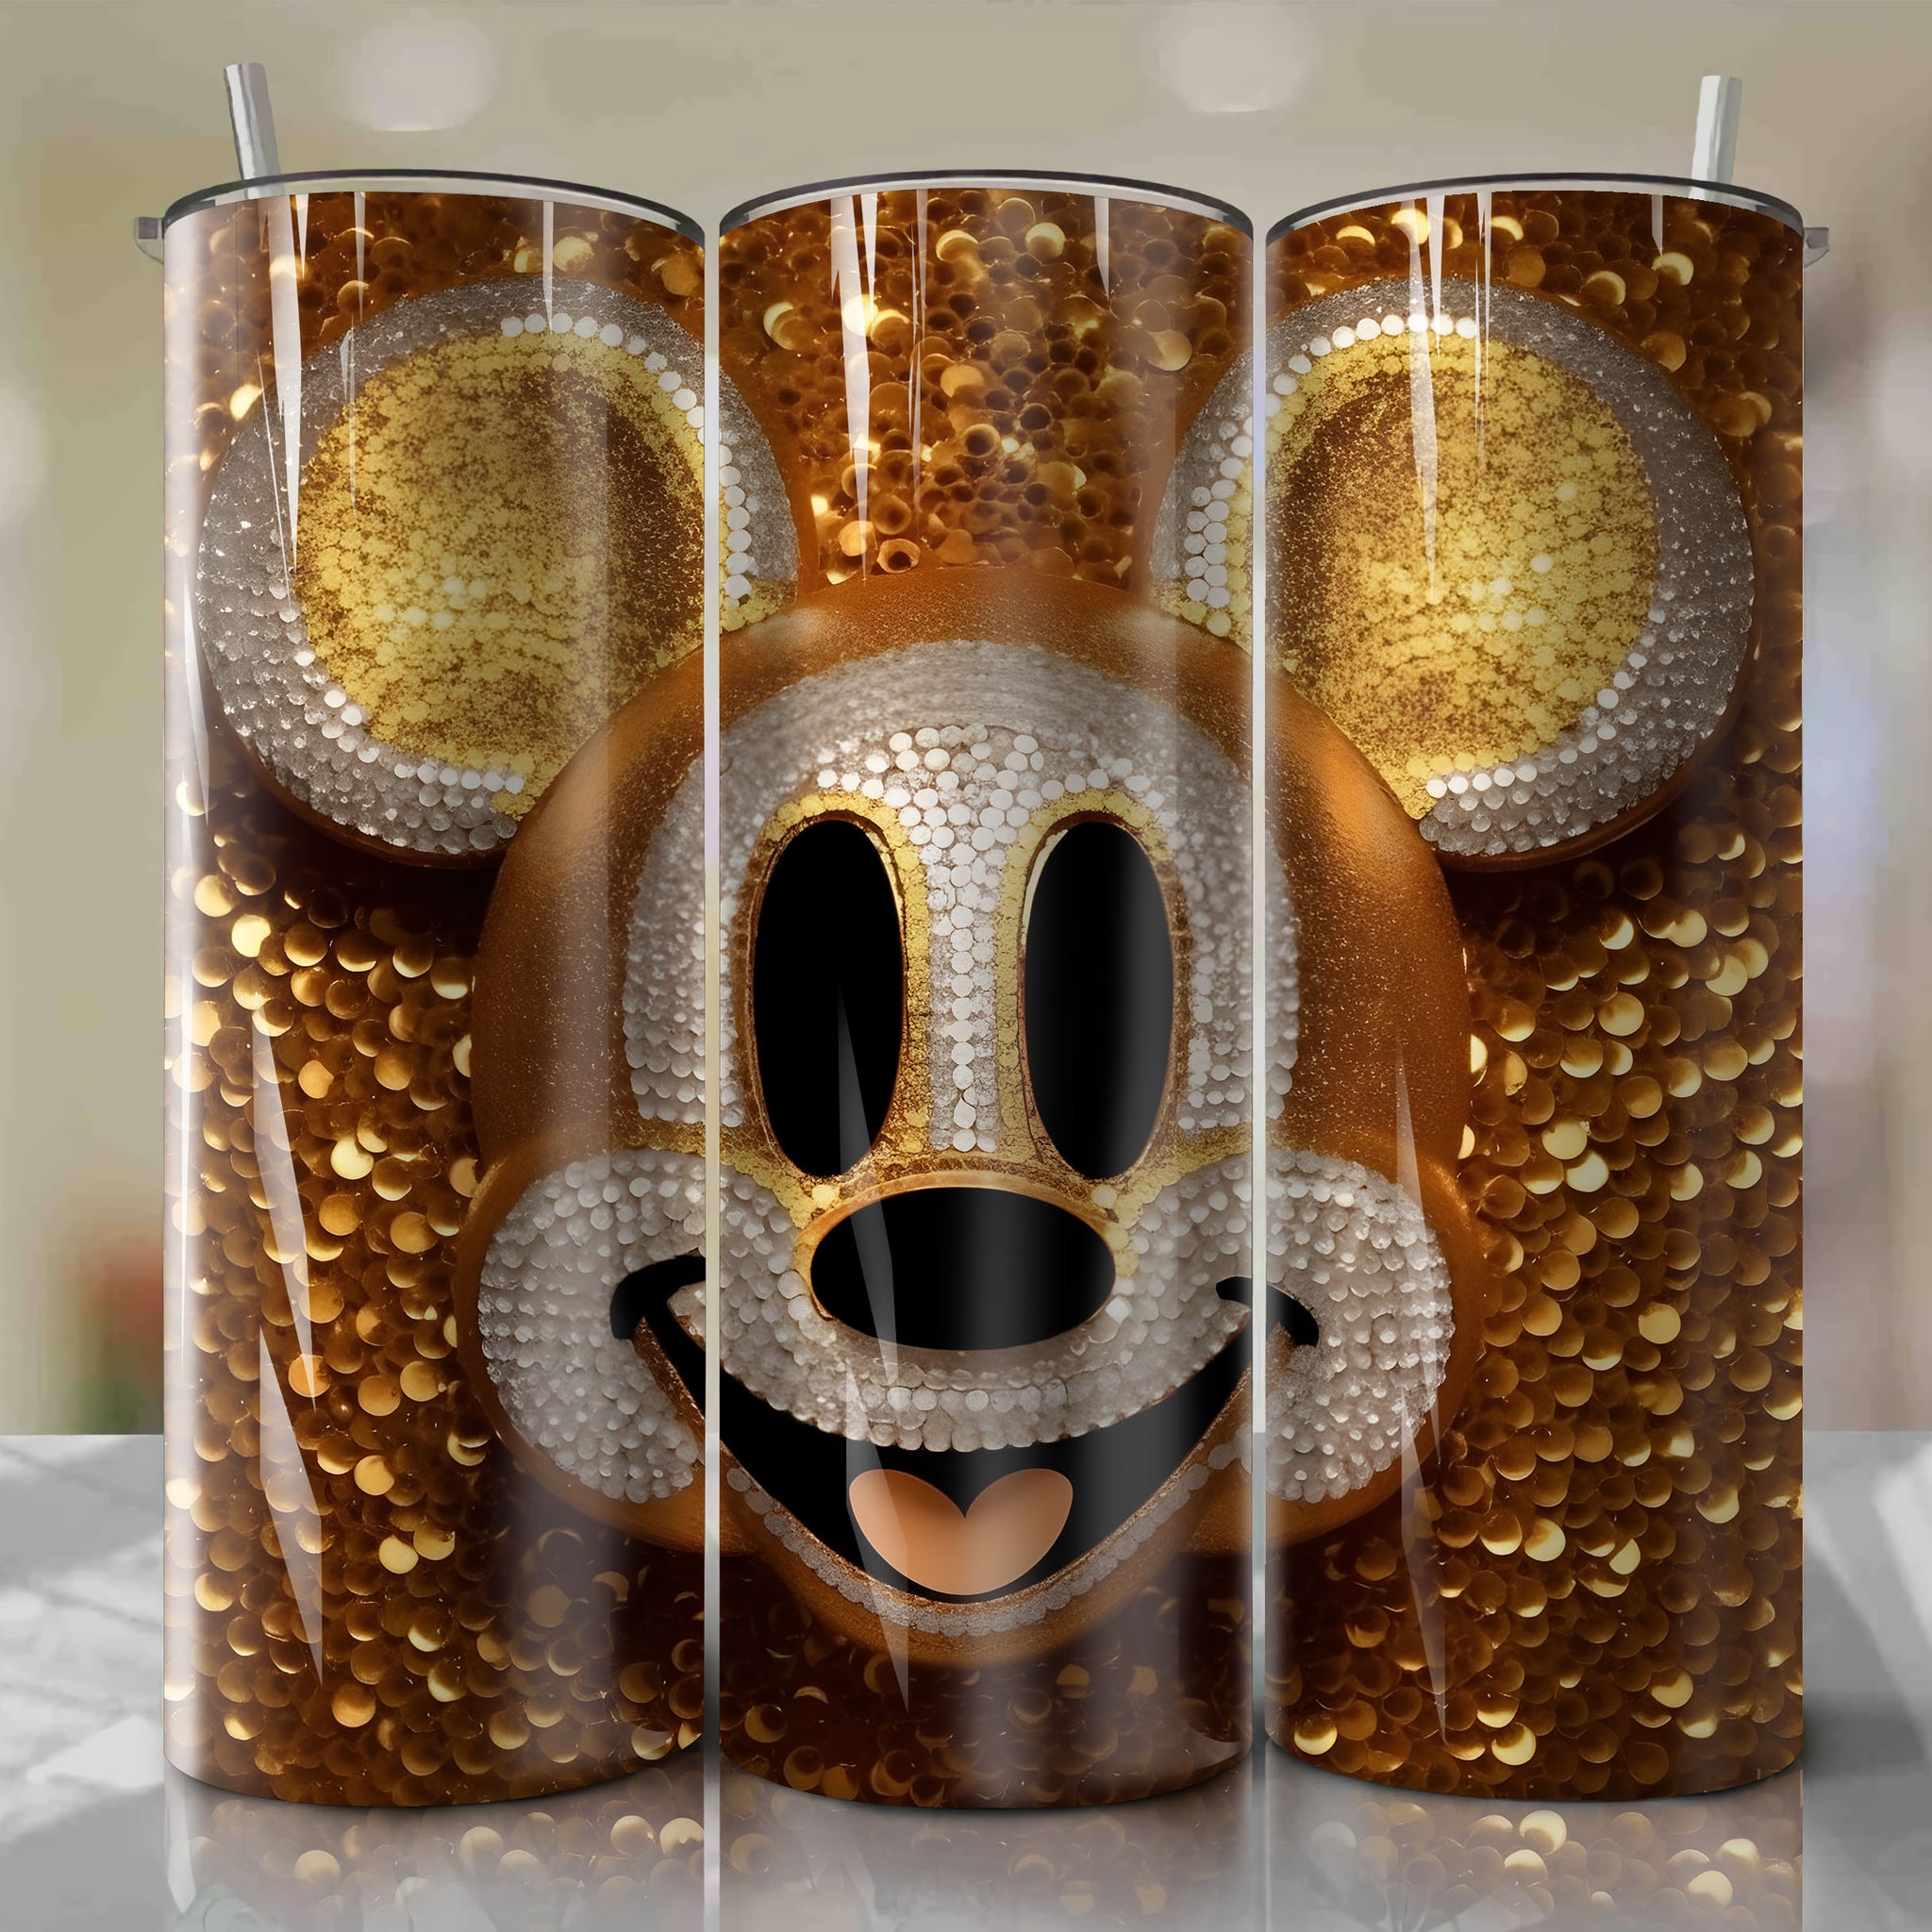 Playful Mickey Mouse Face 3D Bling Graphic - Digital Download for Sublimation Printing